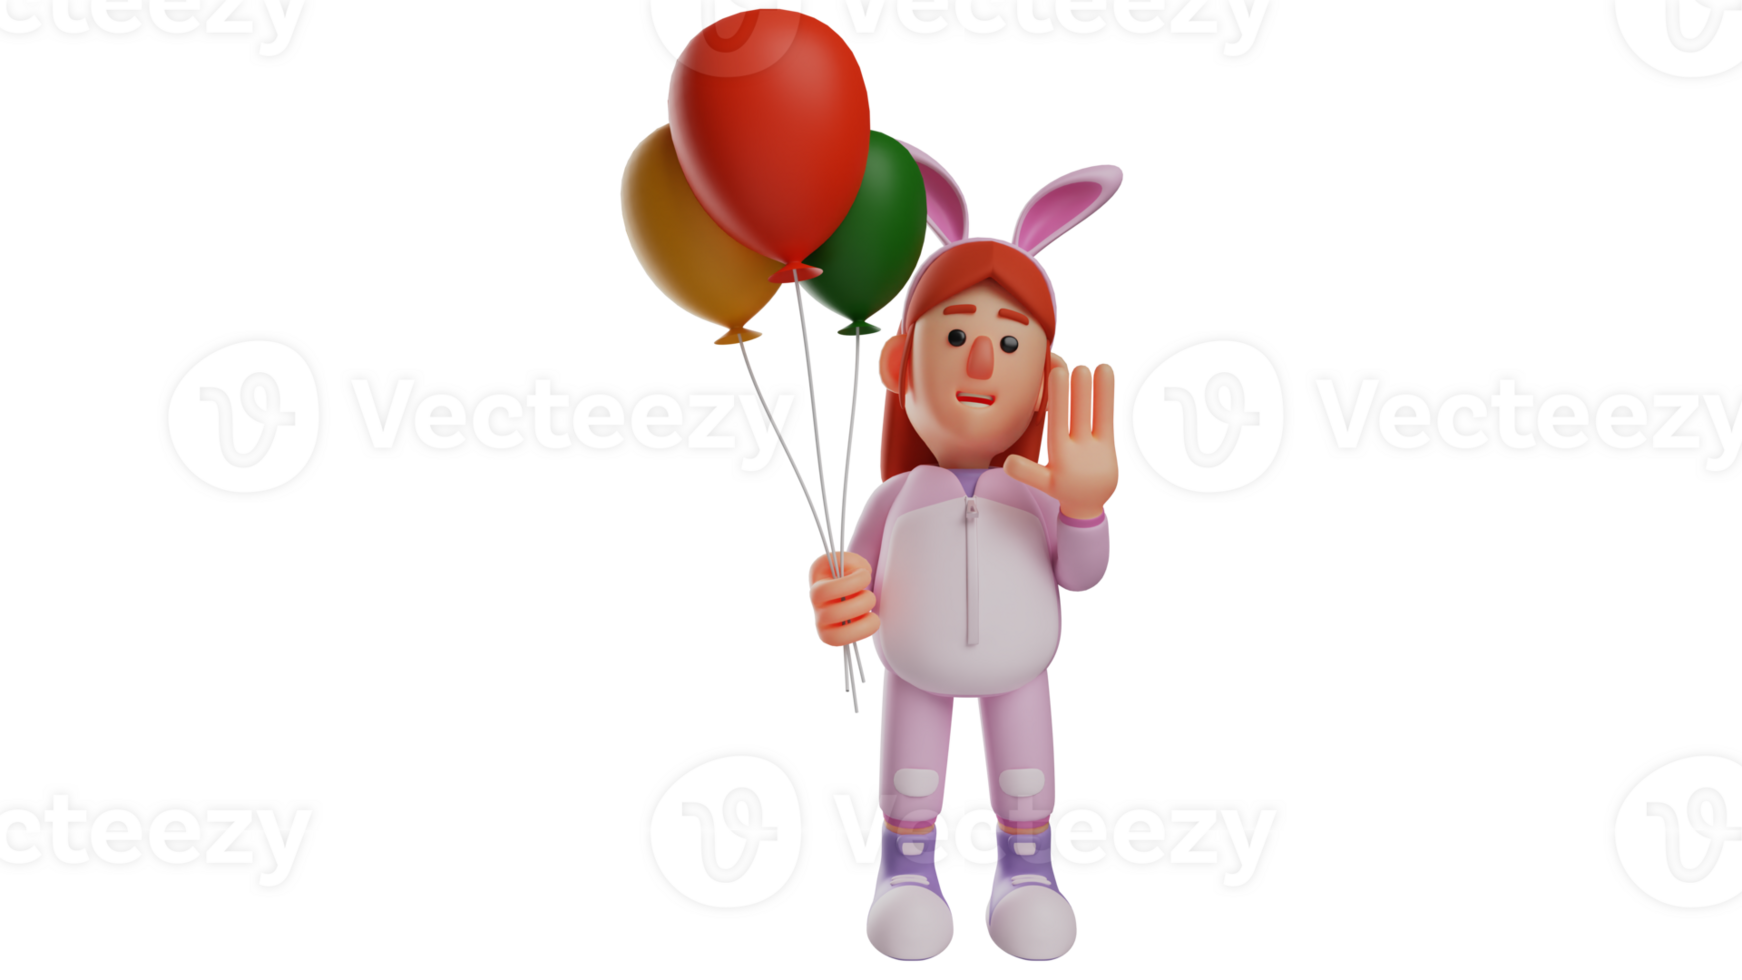 3D illustration. Cute Little Girl 3D cartoon character. Little girl came to the birthday party wearing an adorable bunny costume. Bunny girl is carrying lots of colorful balloons. 3D cartoon character png